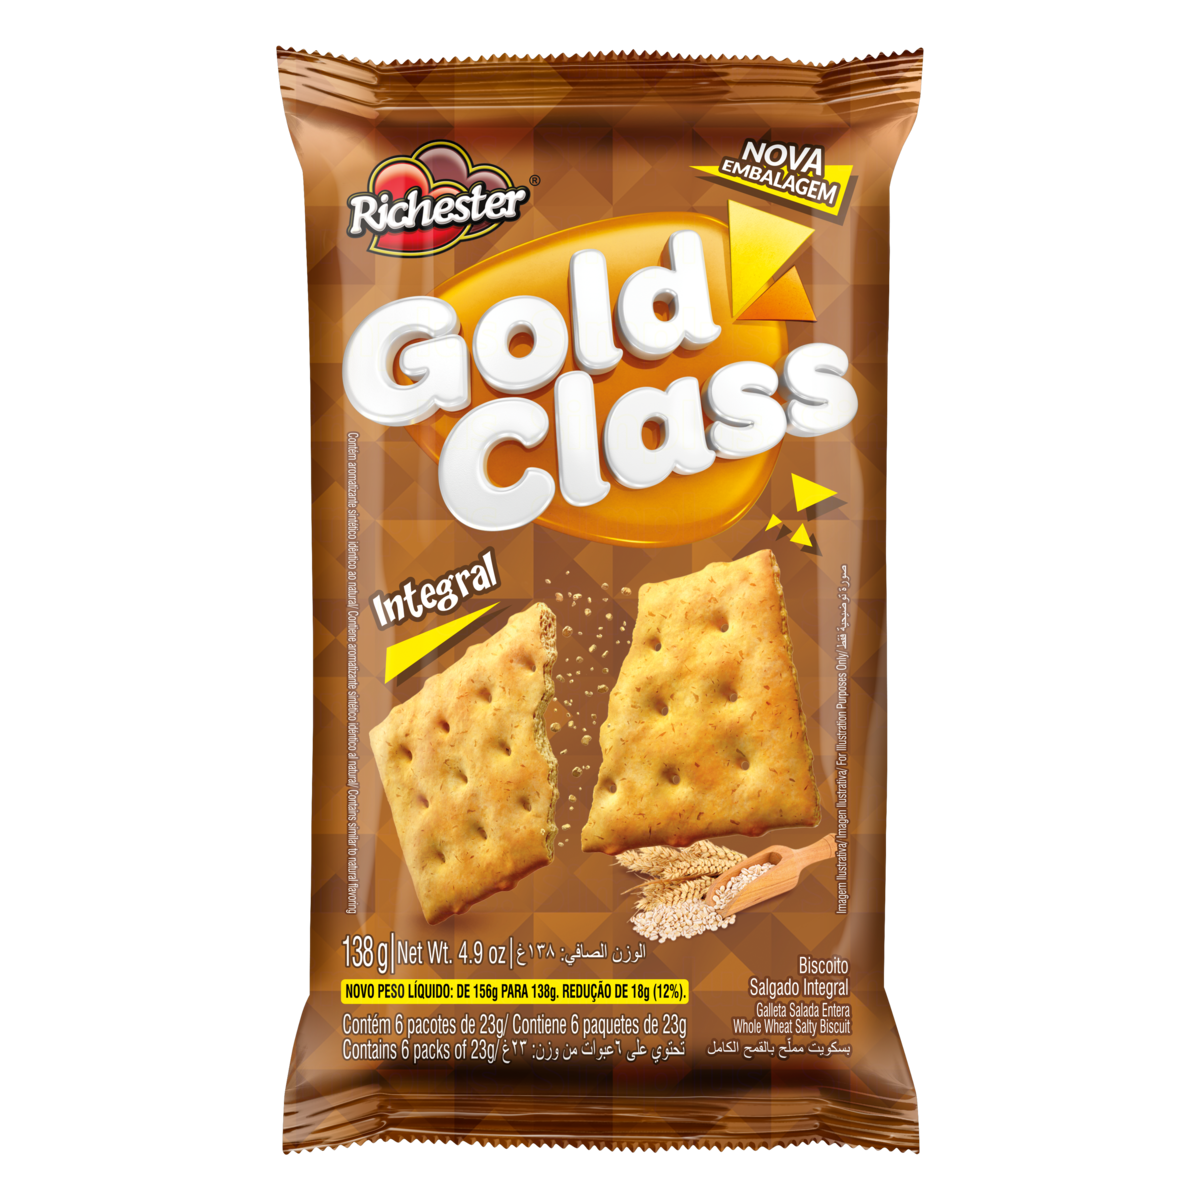 7891152800579 - PACK BISCOITO INTEGRAL RICHESTER GOLD CLASS PACOTE 138G 6 UNIDADES